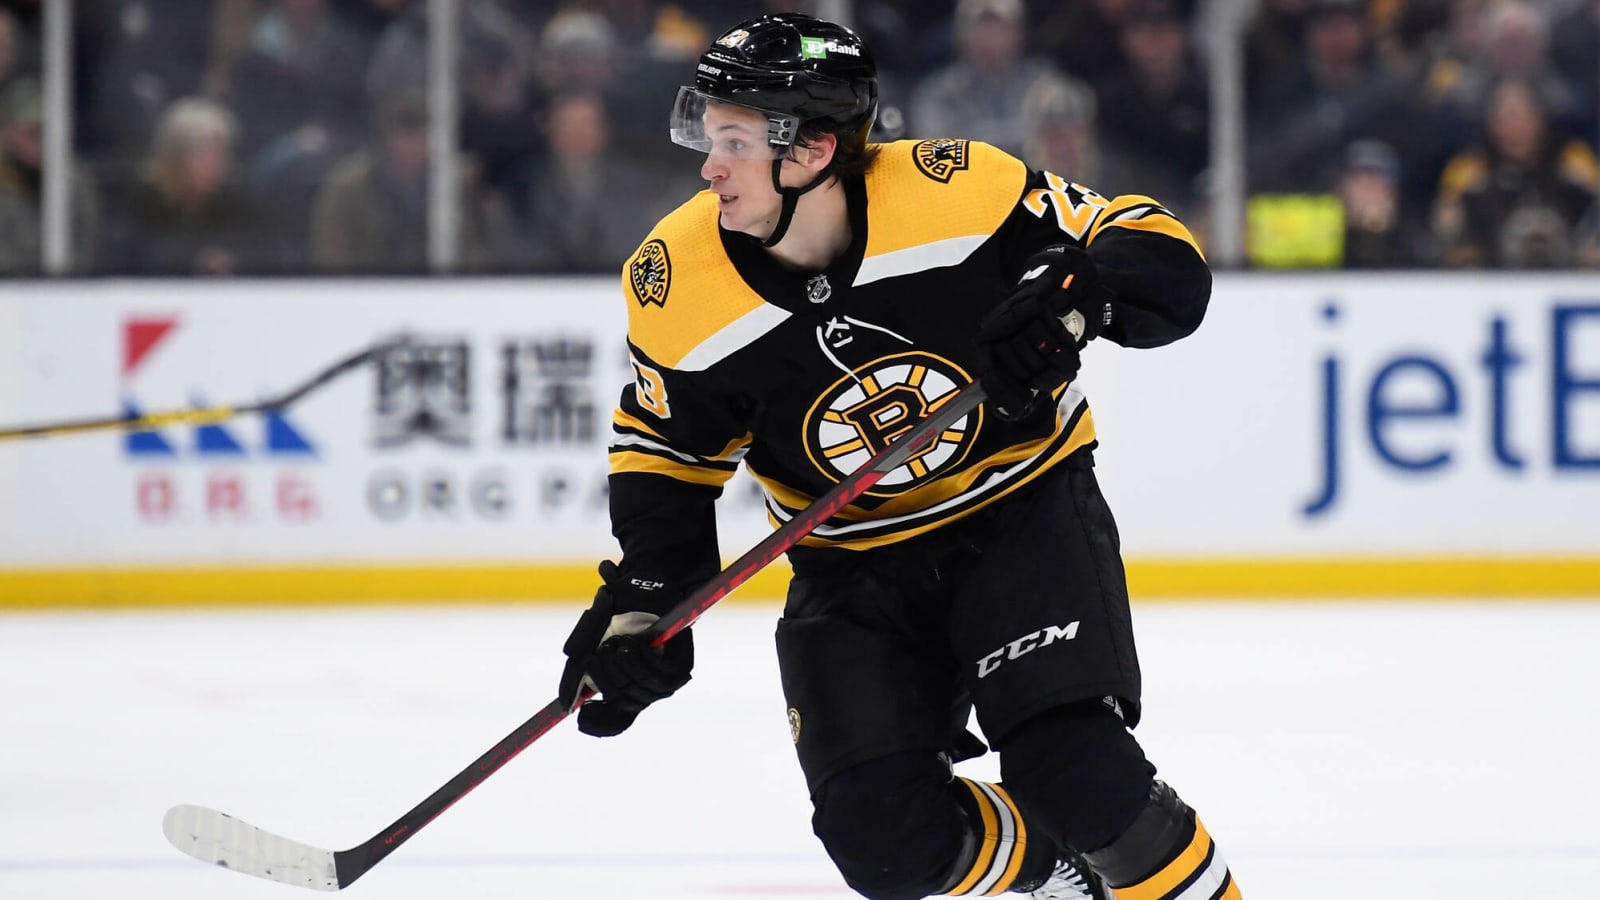 Canucks acquire C Jack Studnicka in trade with Bruins